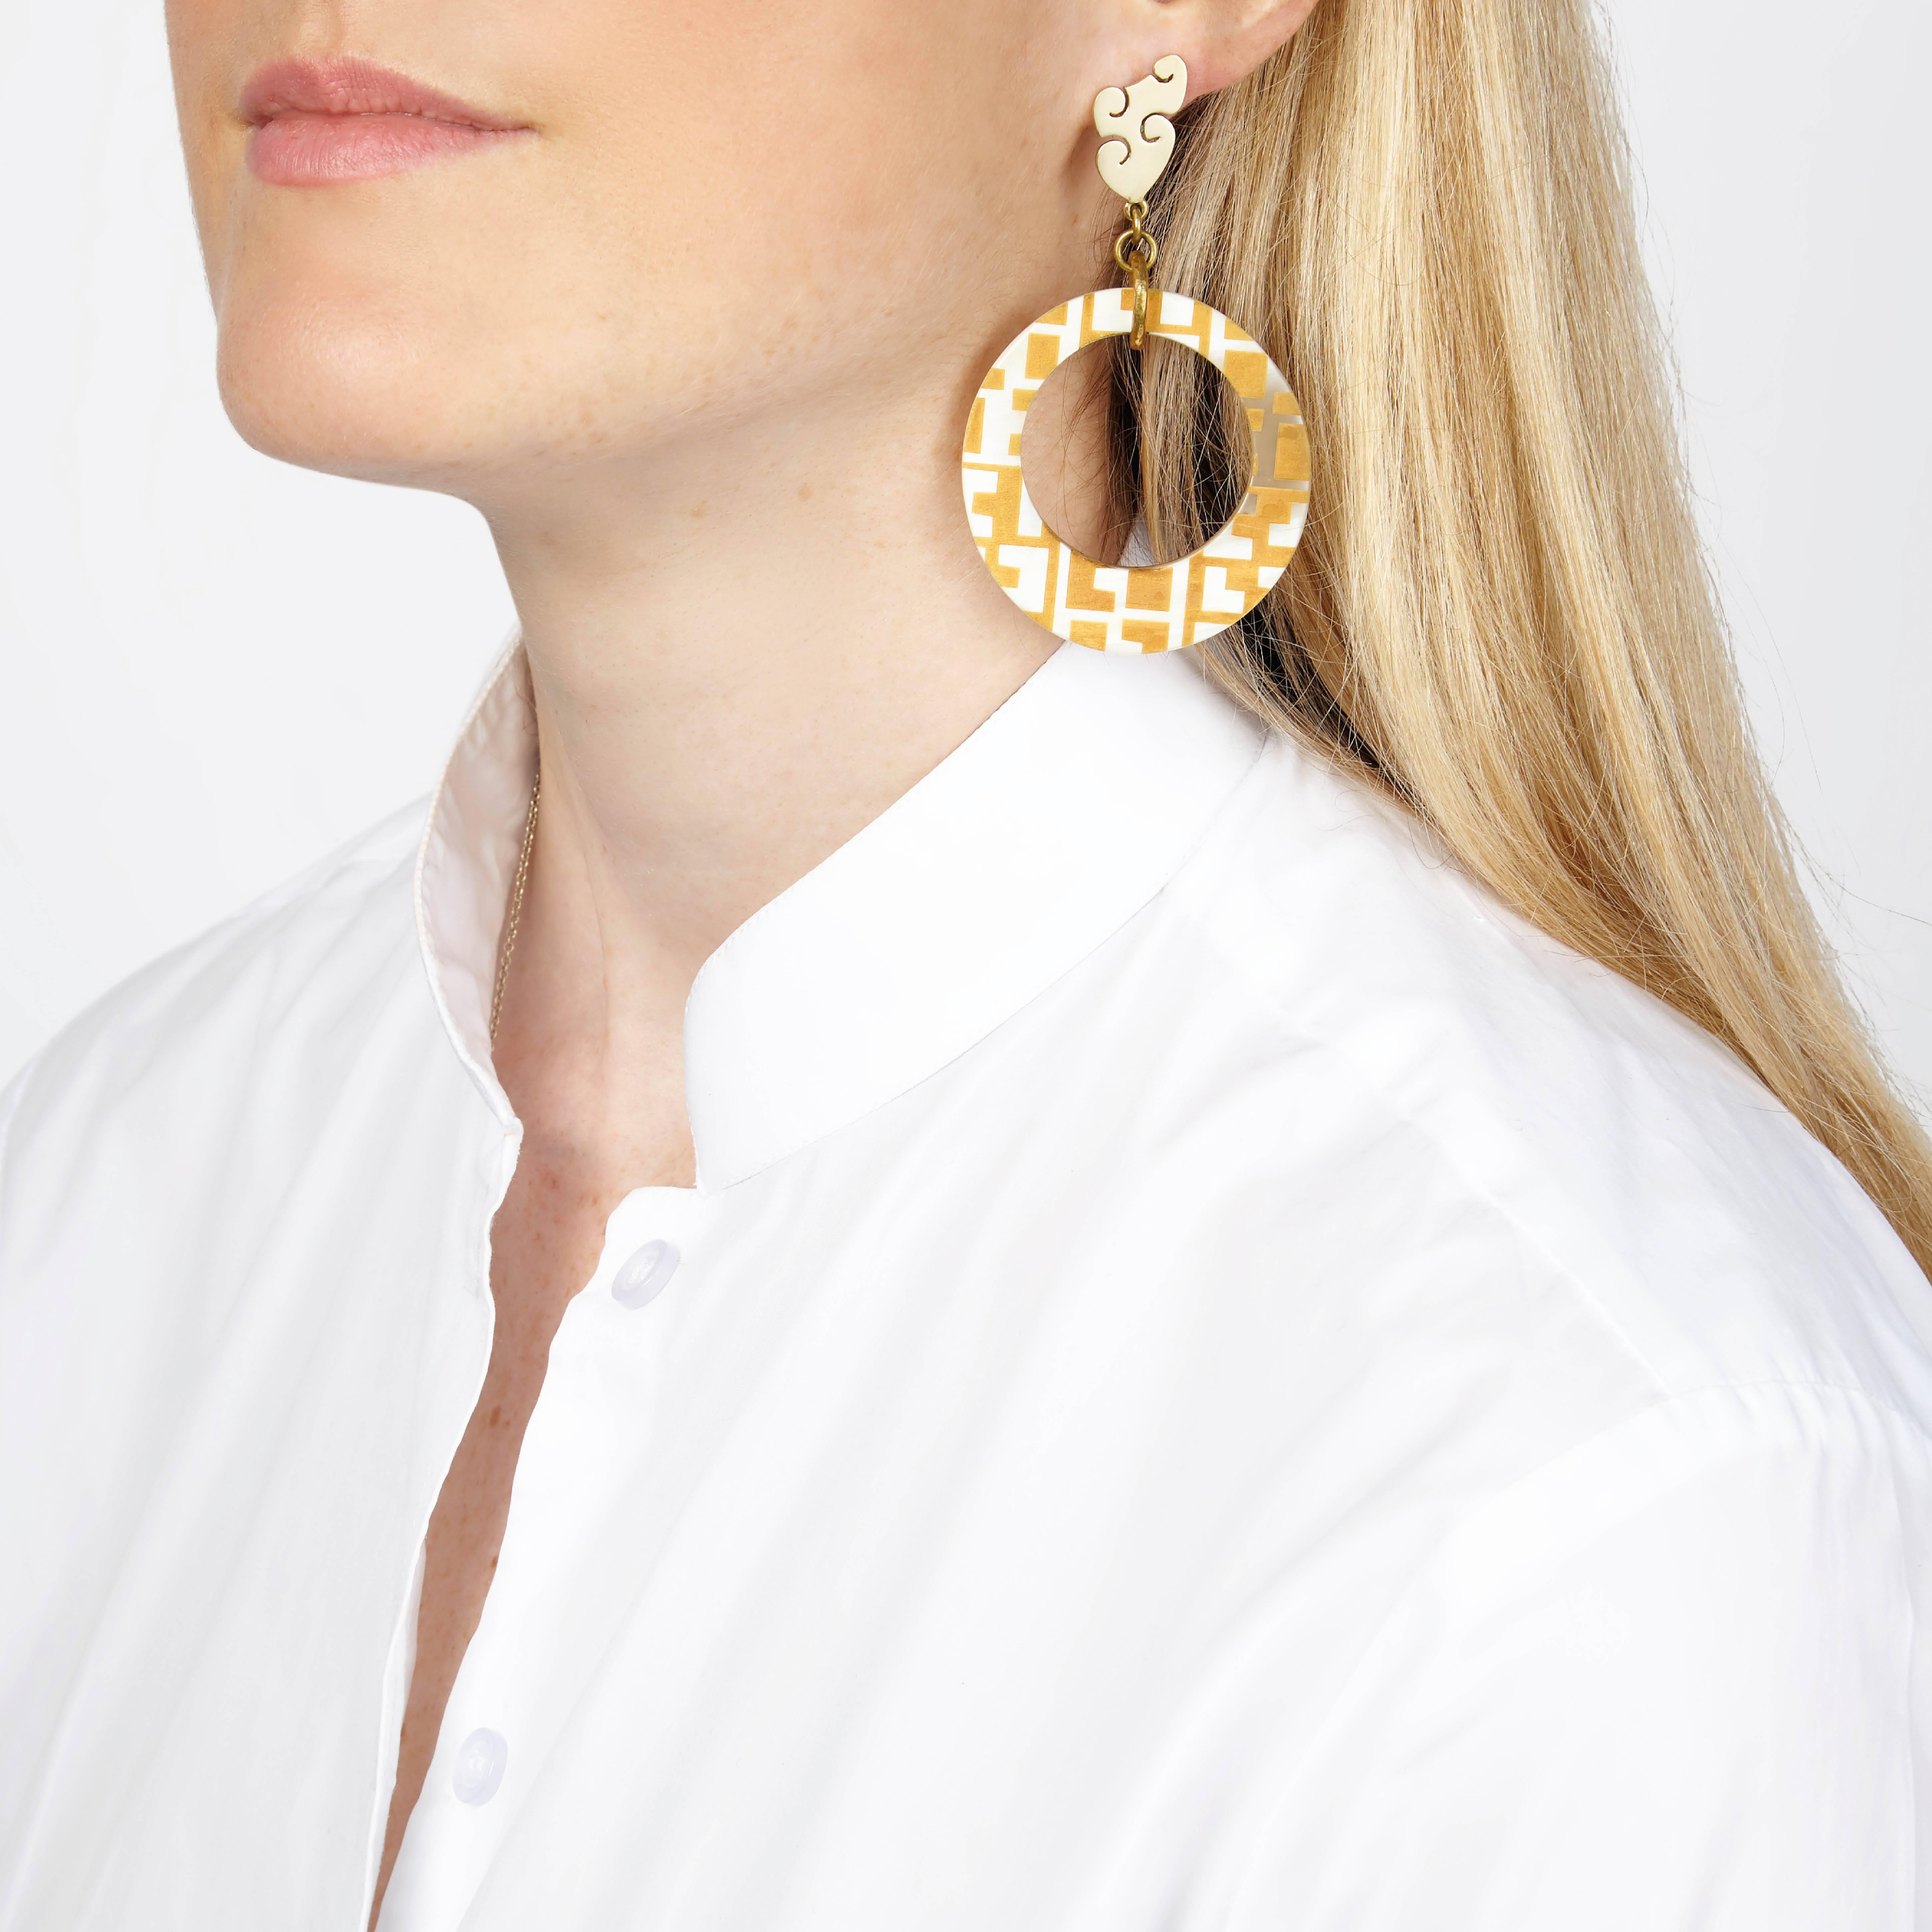 Hand crafted from African cow horn and finely engraved with a geometric design. The engraving reveals a light caramel color beneath the white cow horn. 

These statement earrings are crafted by artisans in Kenya, East Africa, and finished by hand to